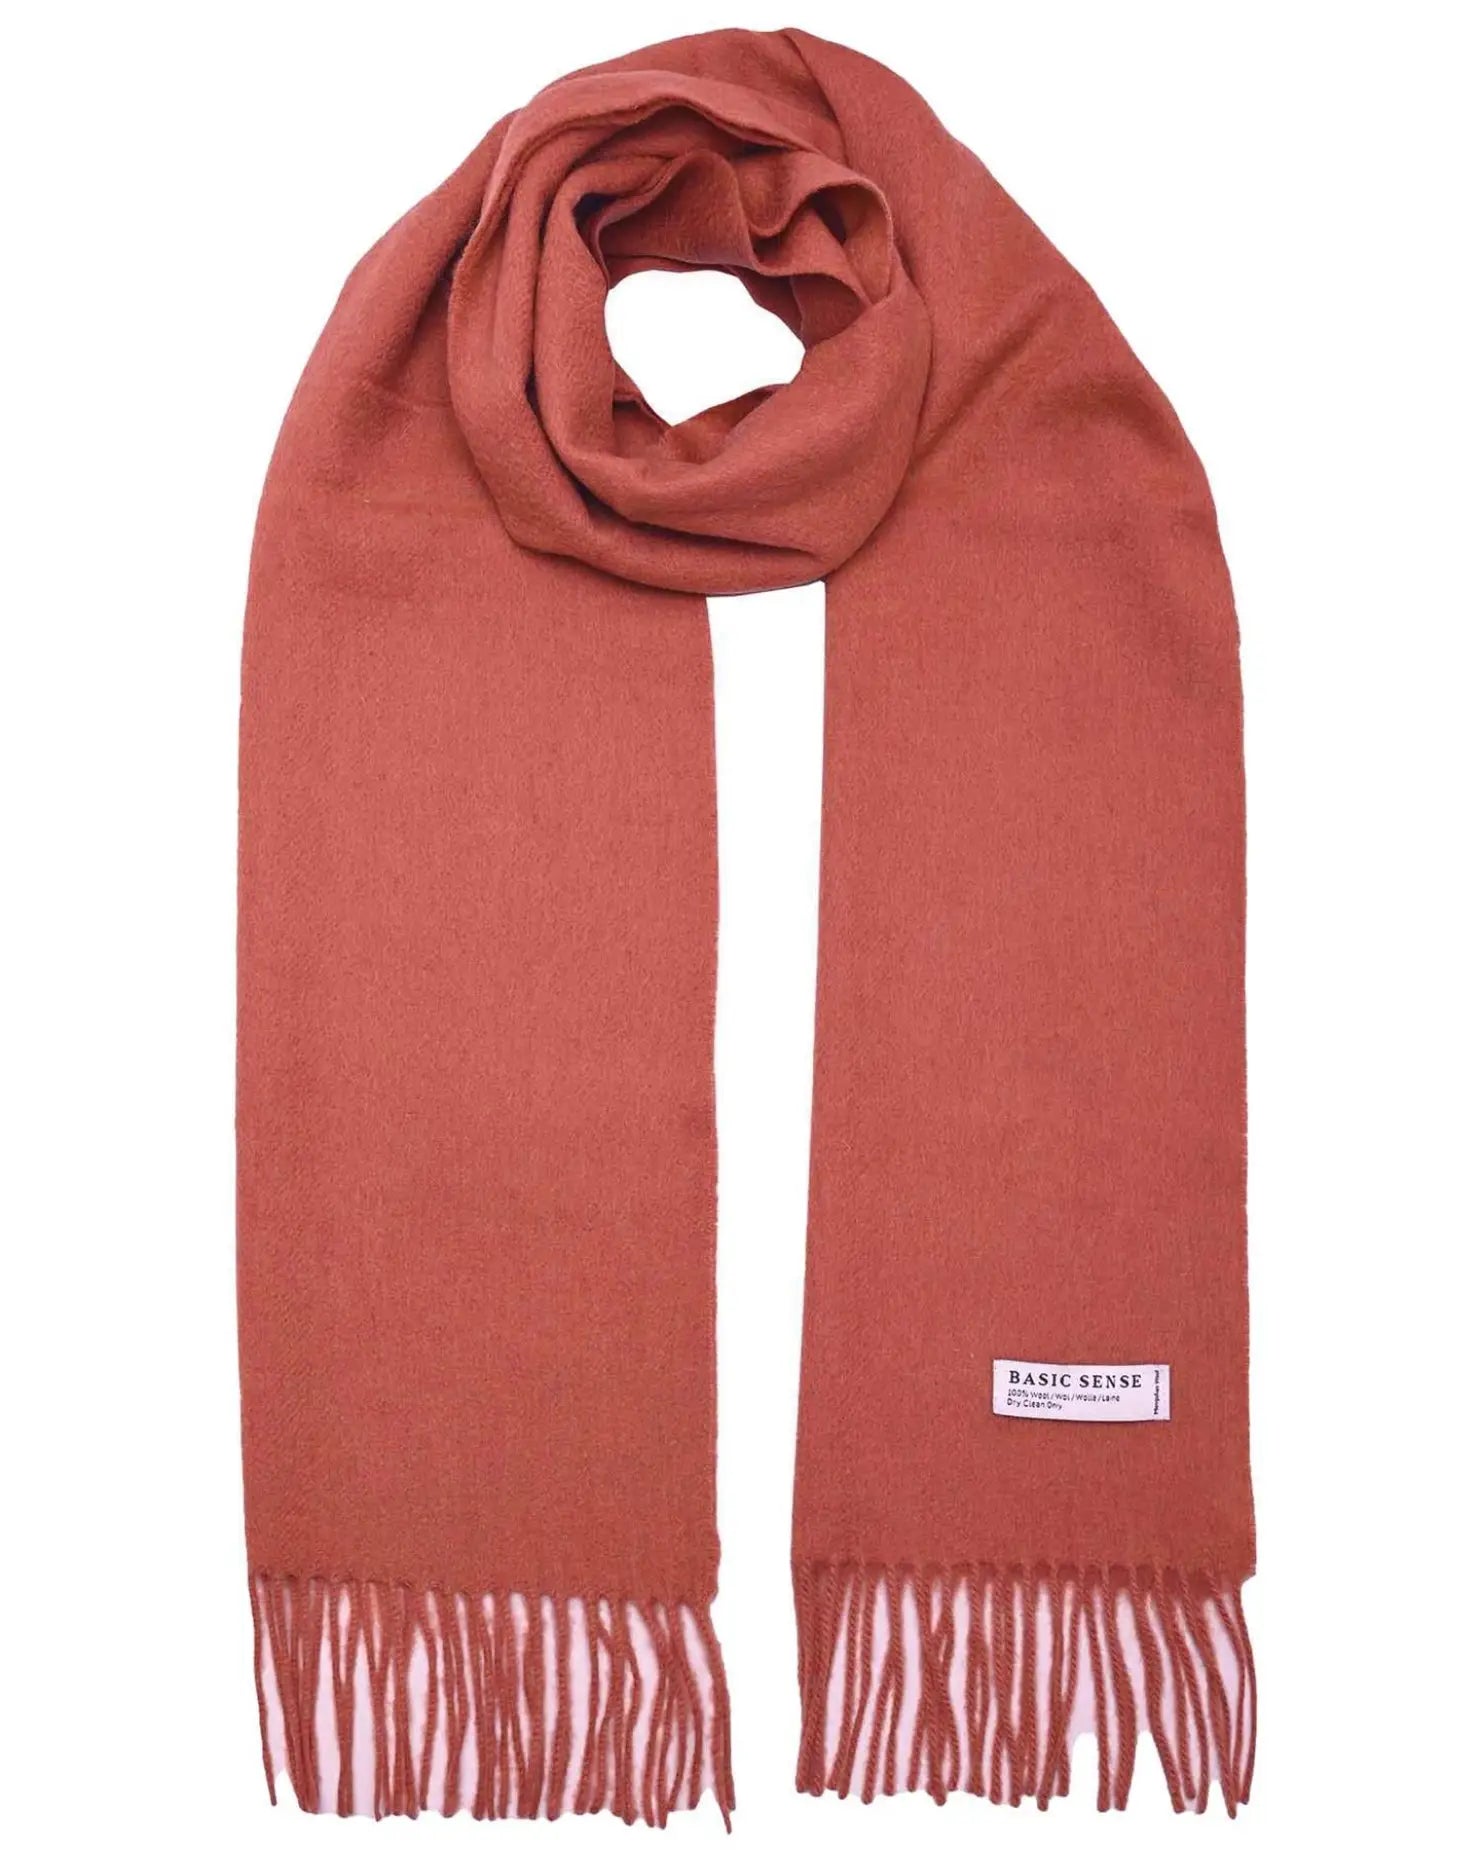 Mongolian wool scarf with red fringe, 190 x 32 cm